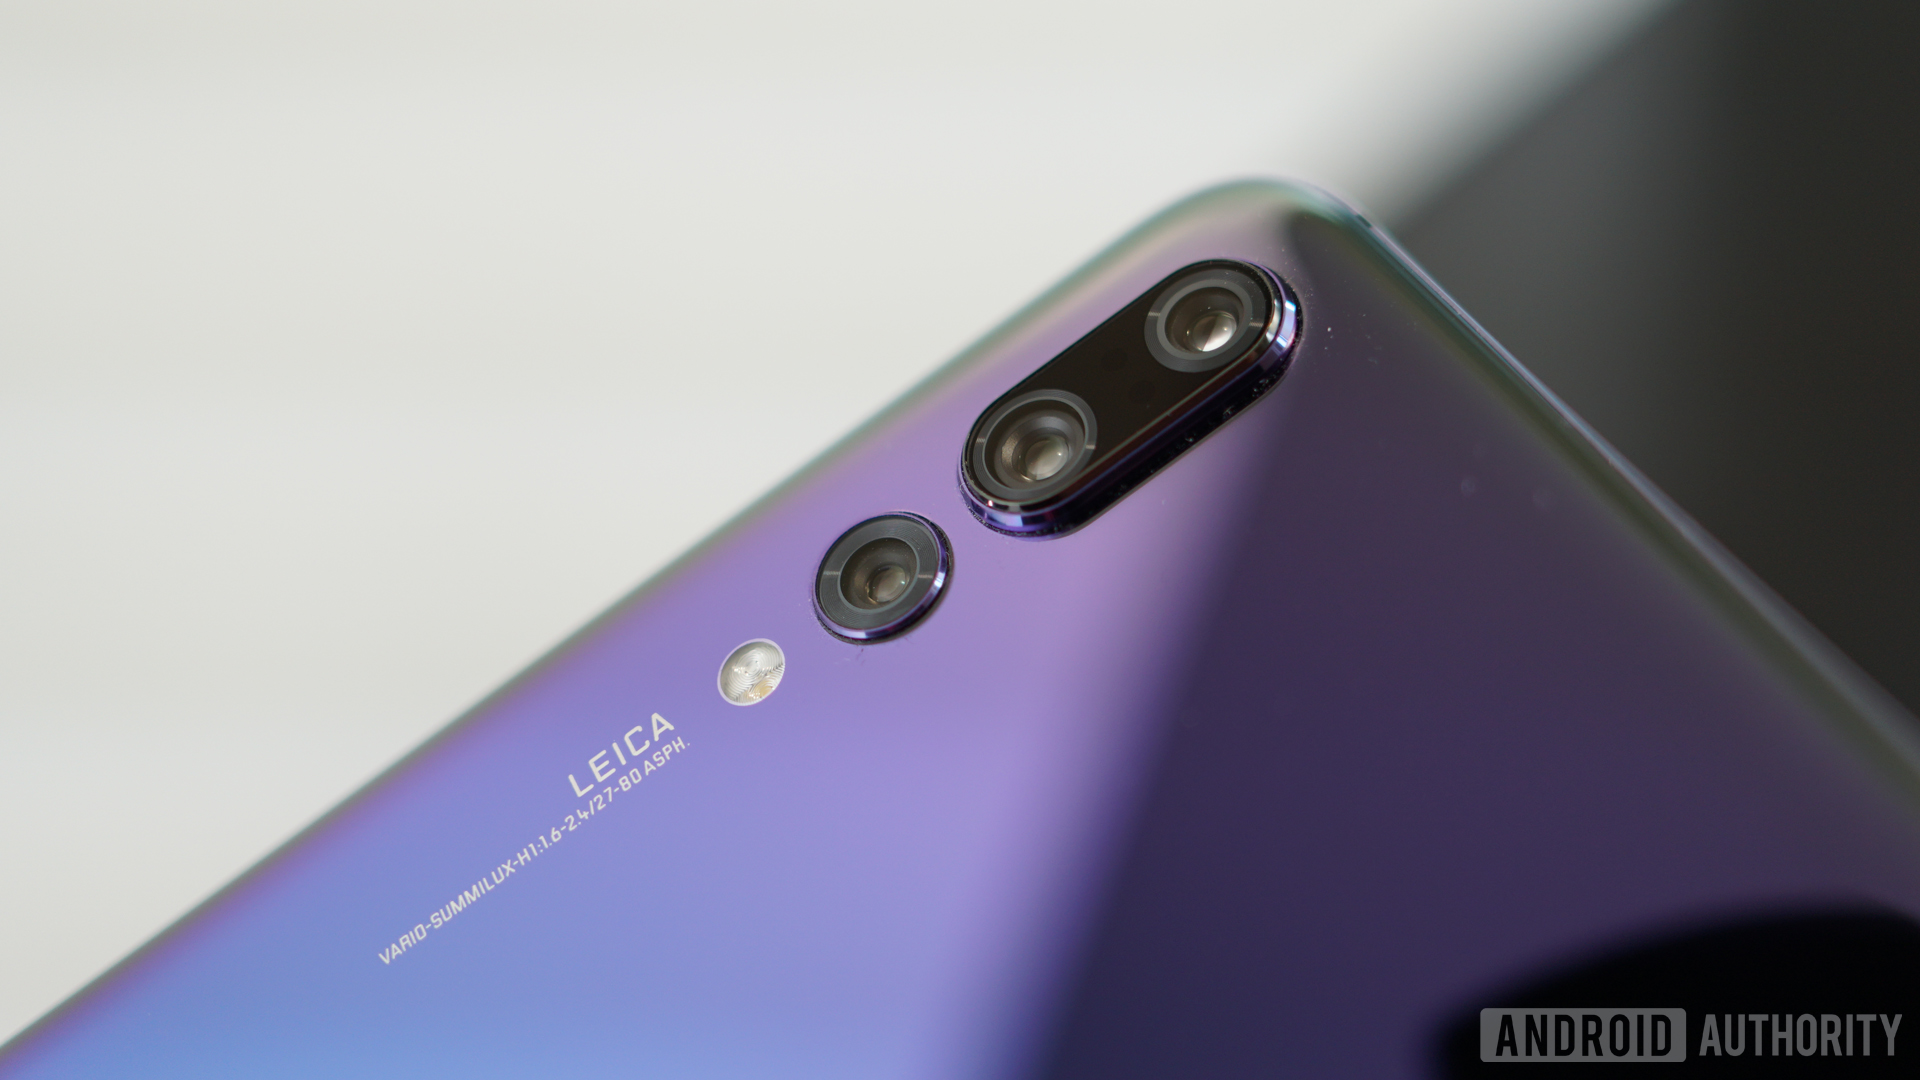 Huawei's flagships use super resolution to deliver better zoomed shots.